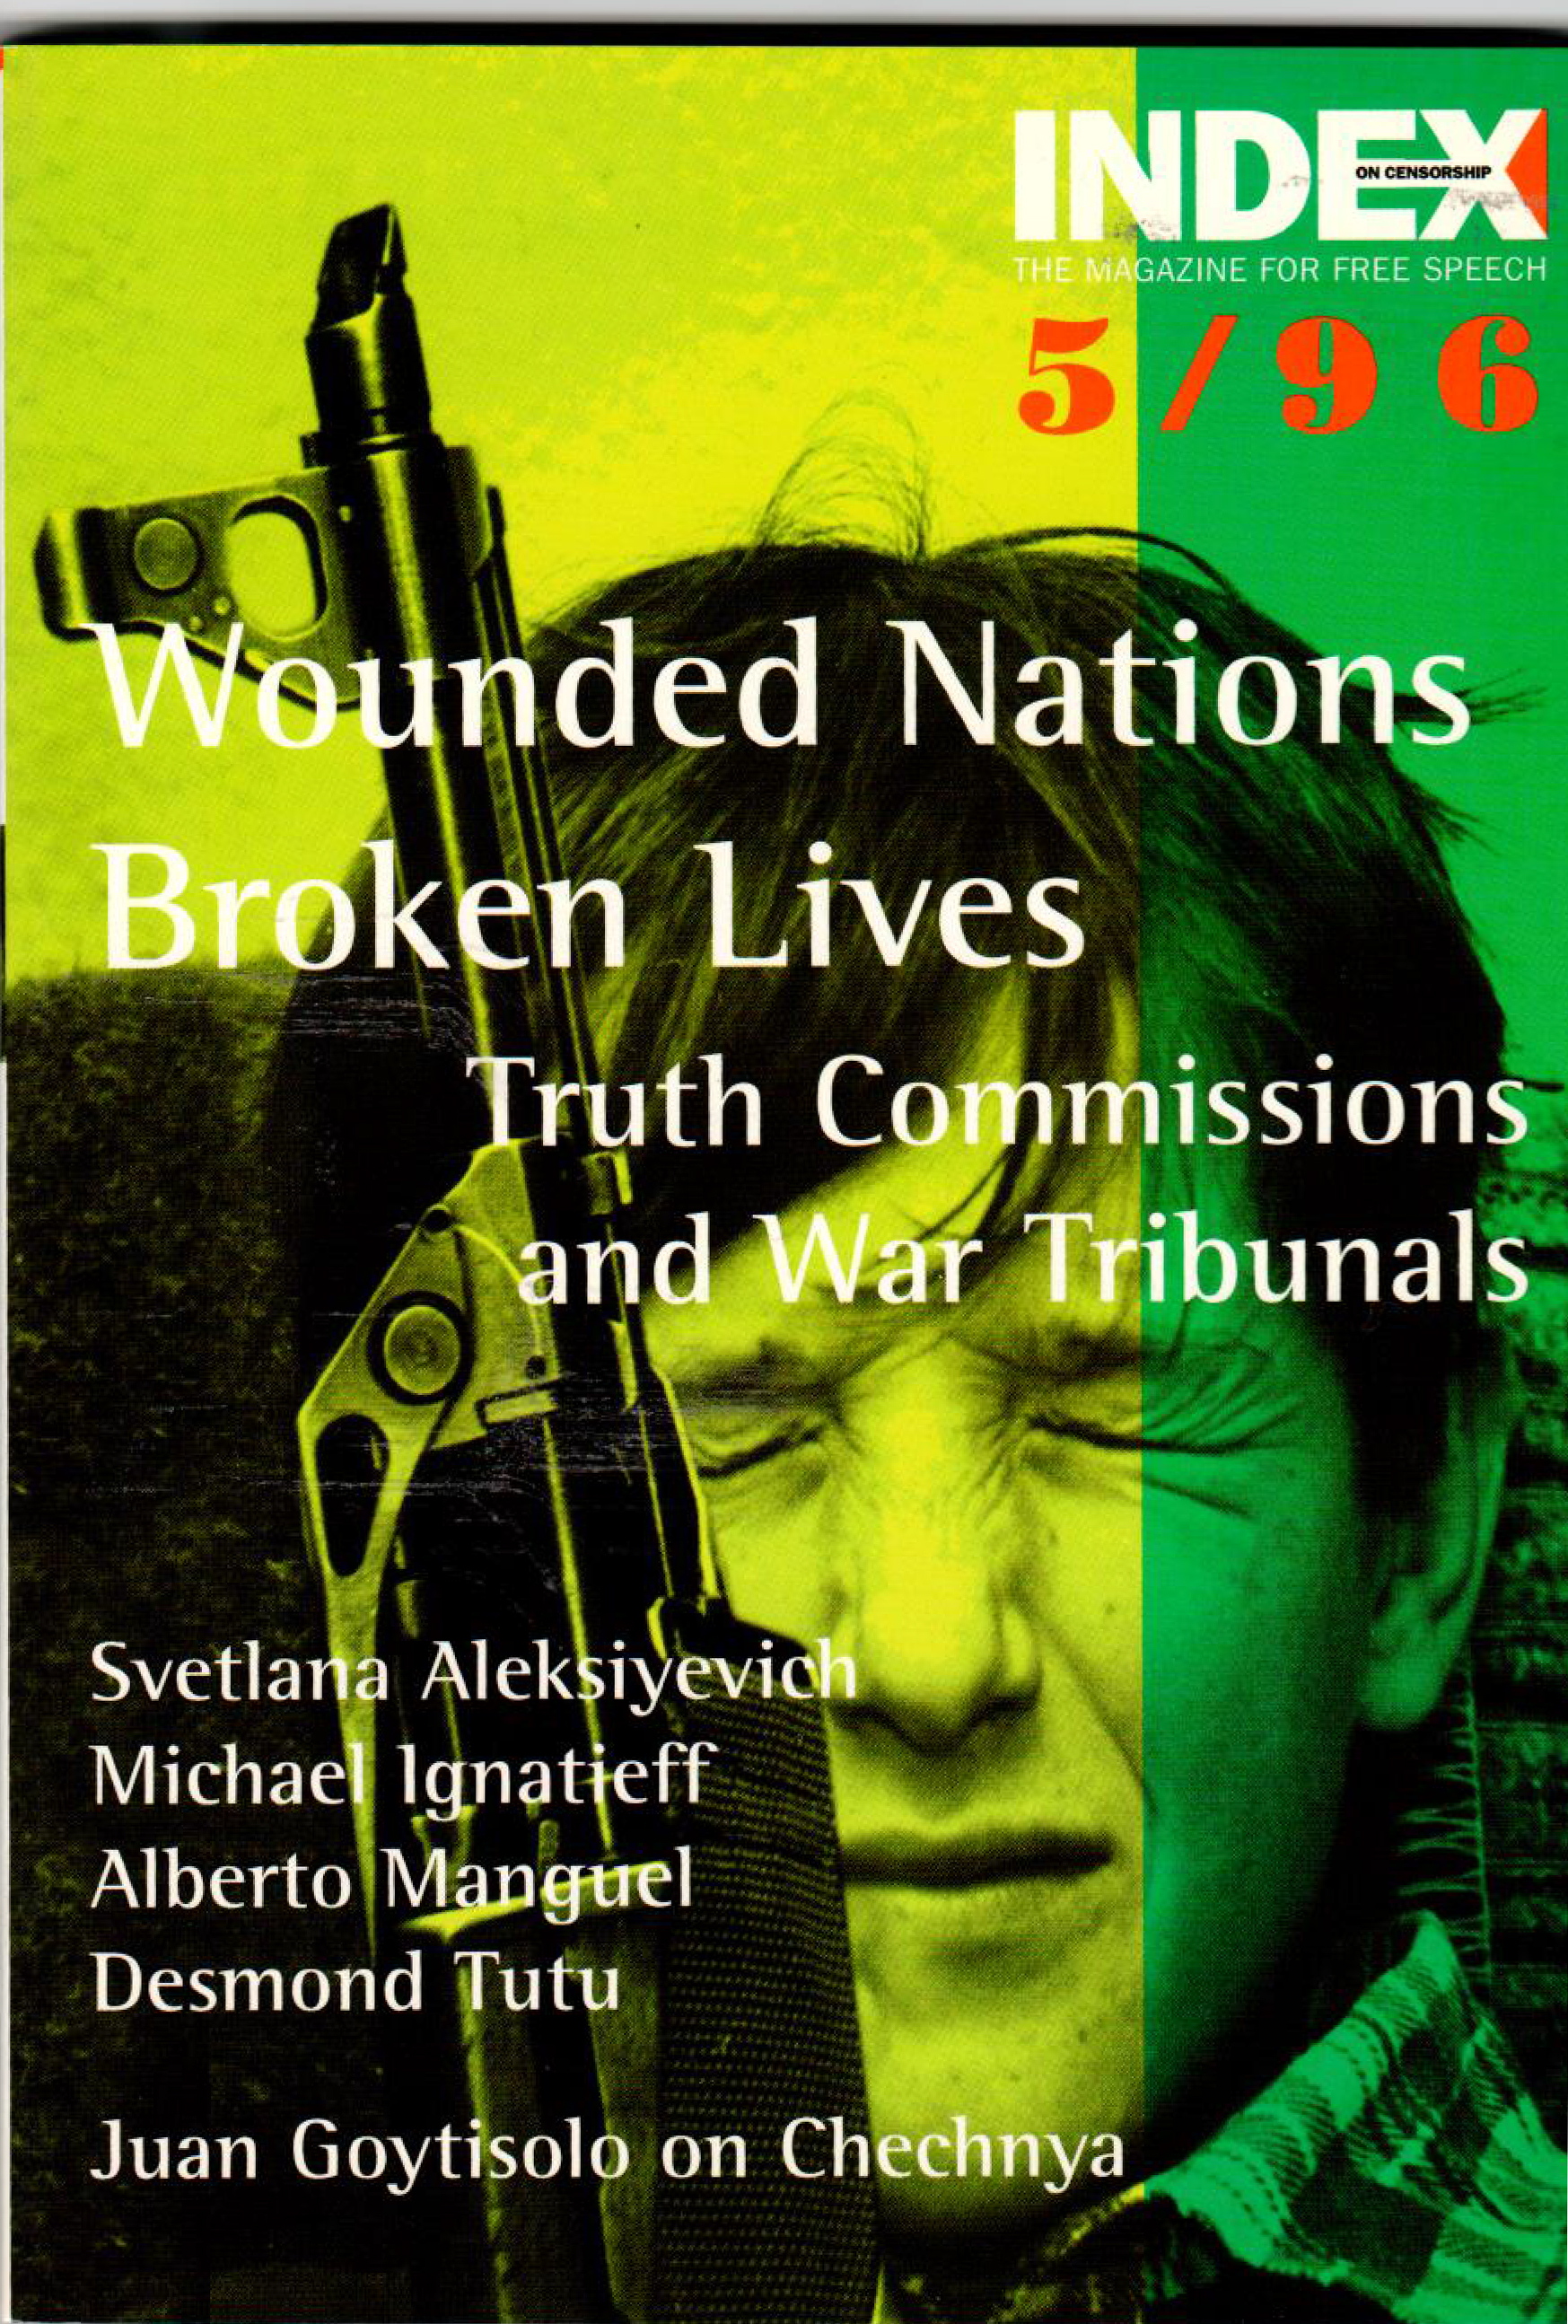 Wounded nations, broken lives, the September 1996 issue of Index on Censorship magazine.